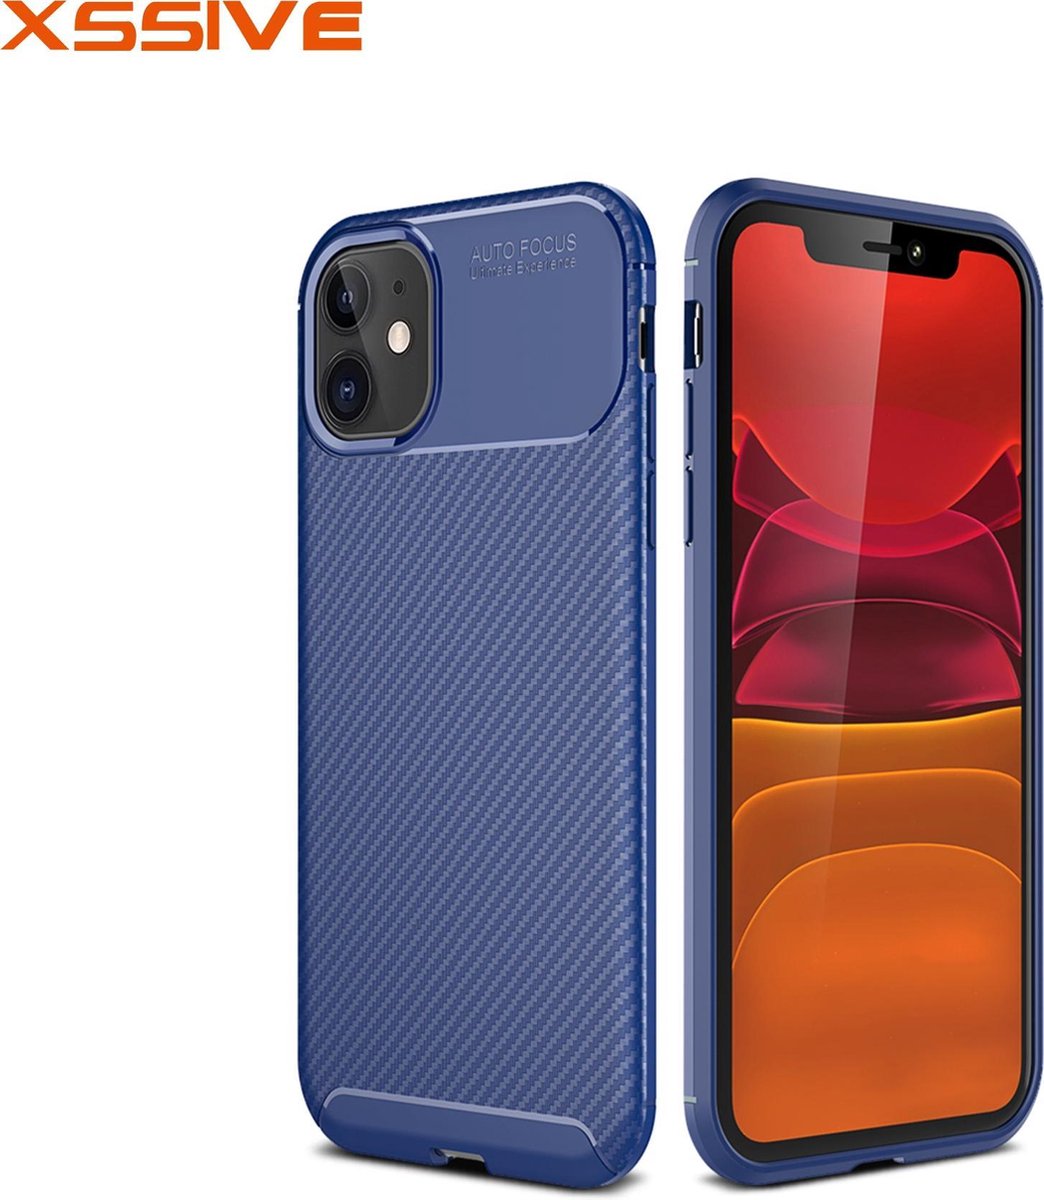 Xssive Soft Case - Carbon TPU - Back Cover voor Apple iPhone 12 - iPhone 12 Pro (6,1) - Blauw